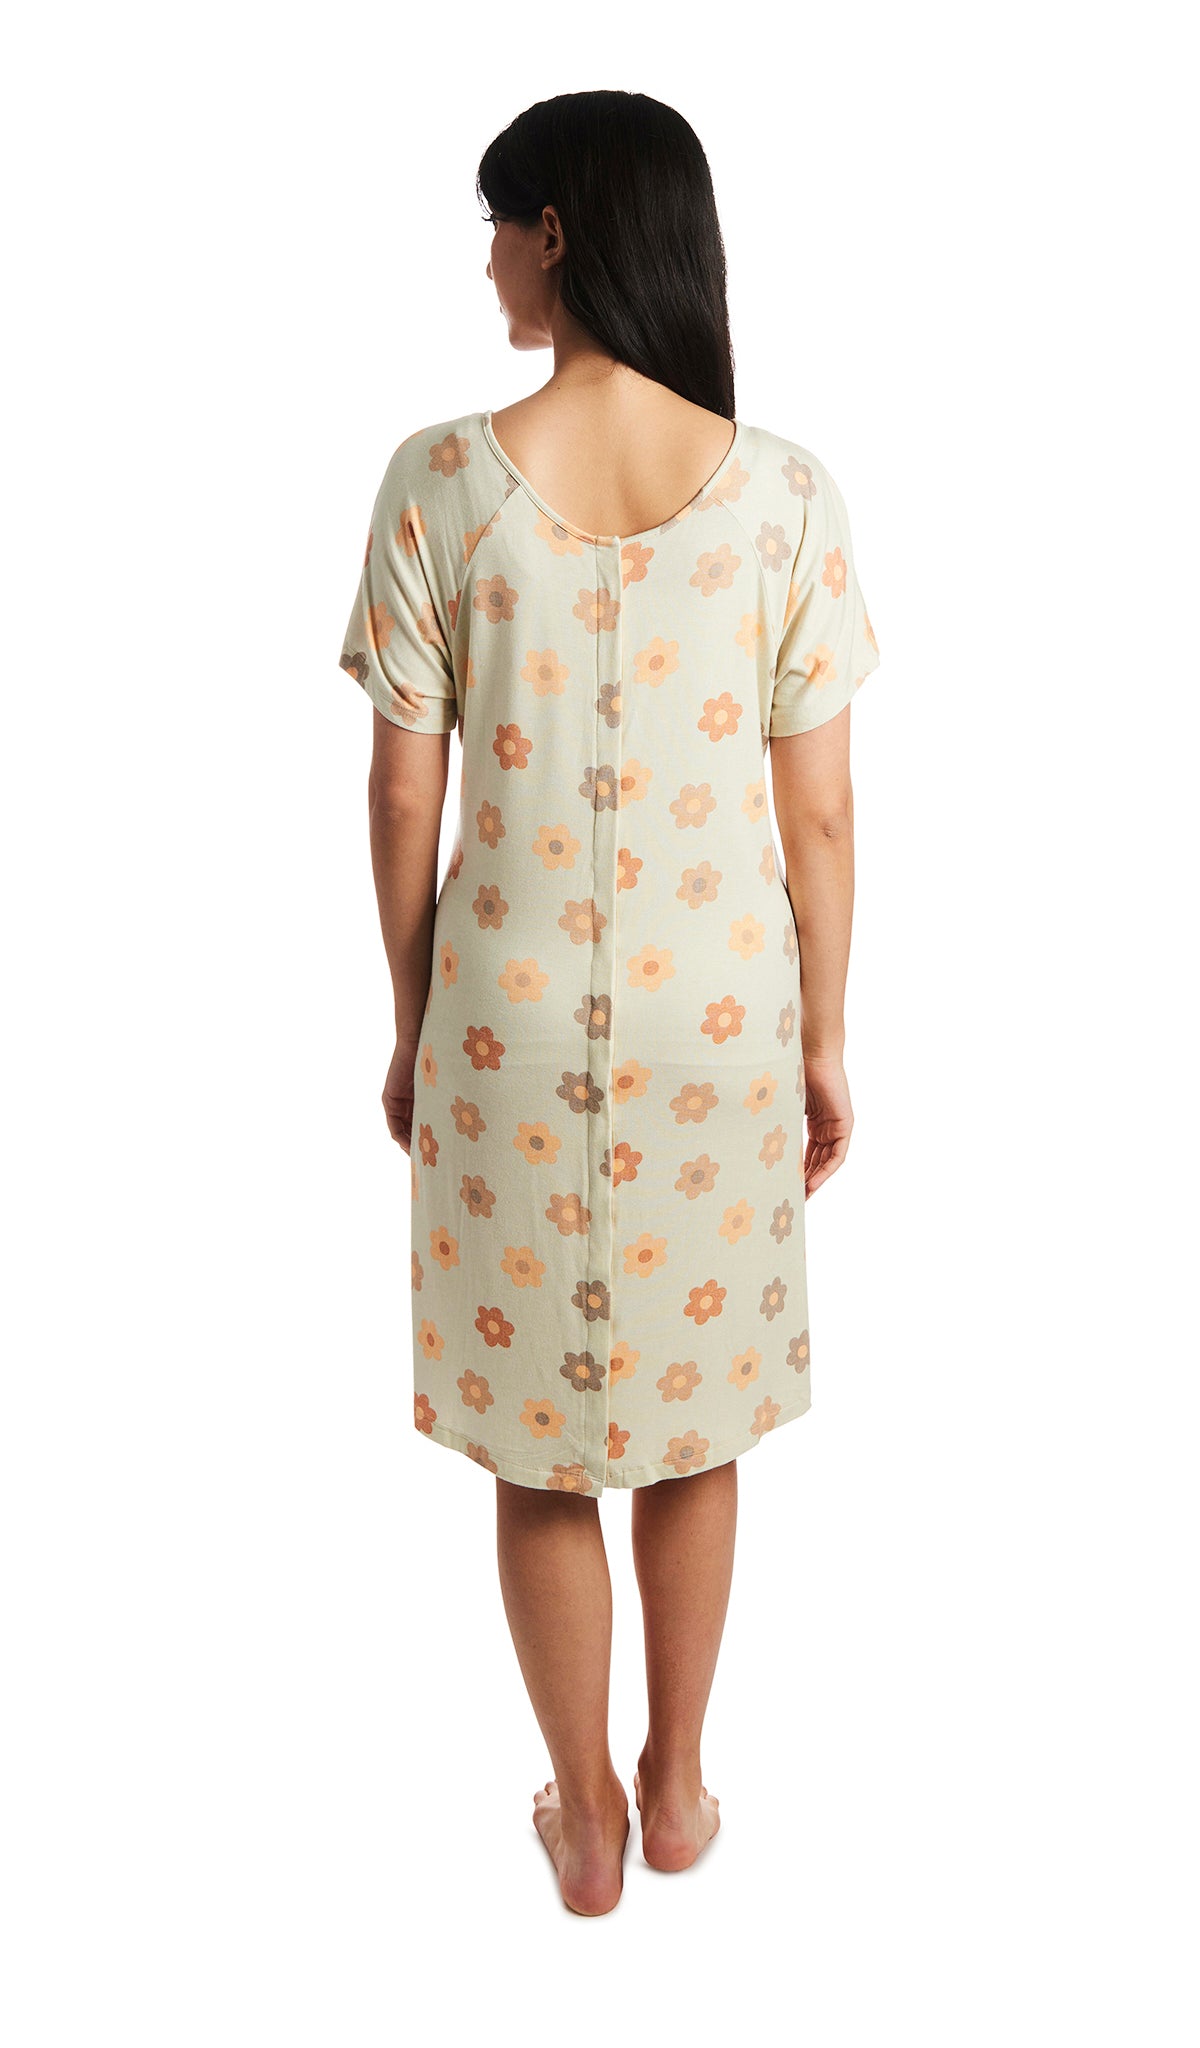 Daisies Rosa hospital gown. Back shot of woman wearing hospital gown with full-length snap-back opening.